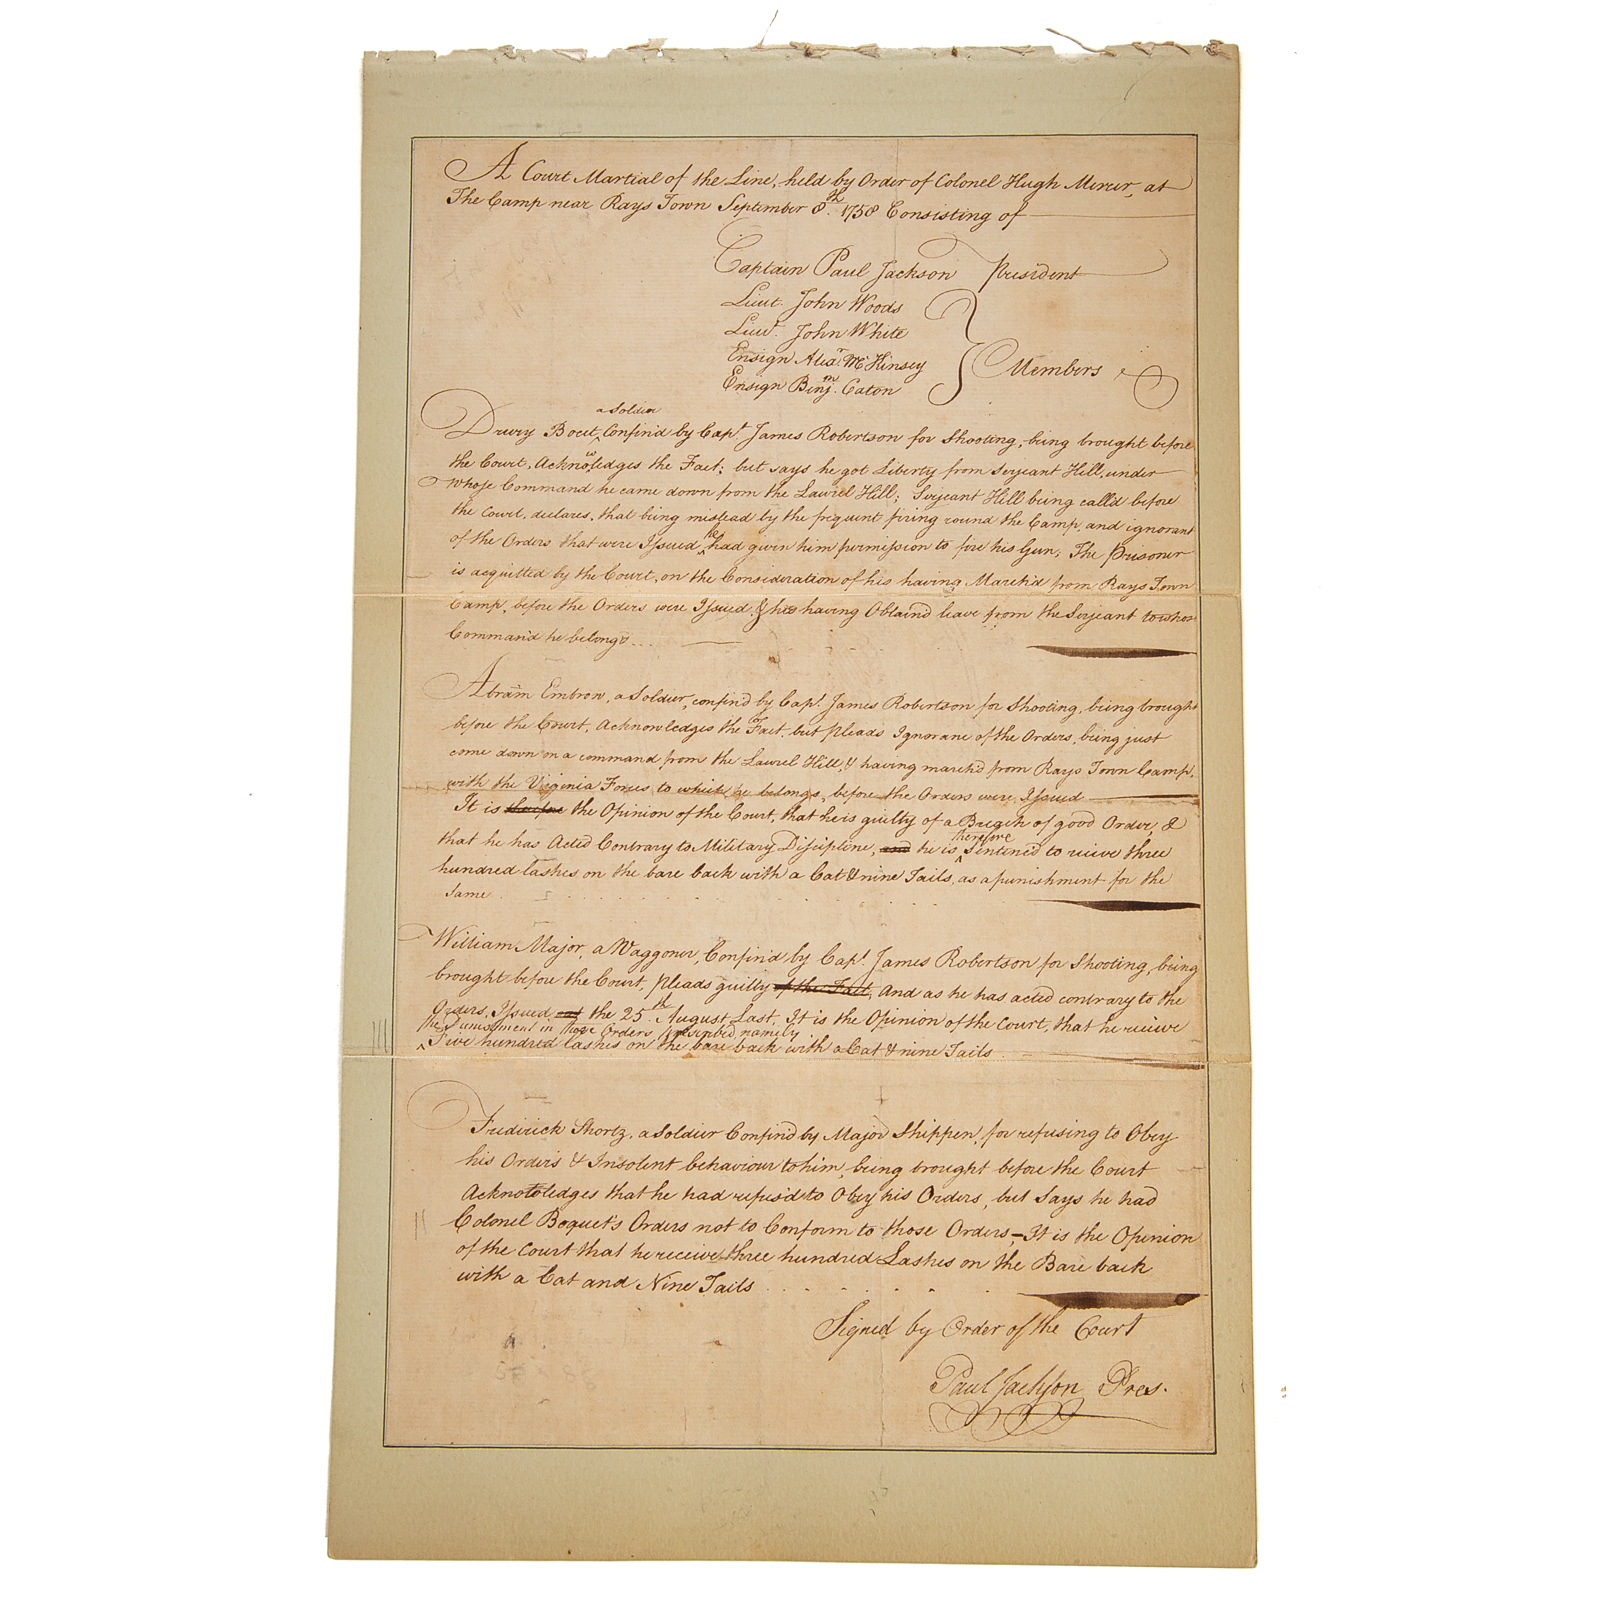 COURT MARTIAL DOCUMENT FORBES S 3353a7